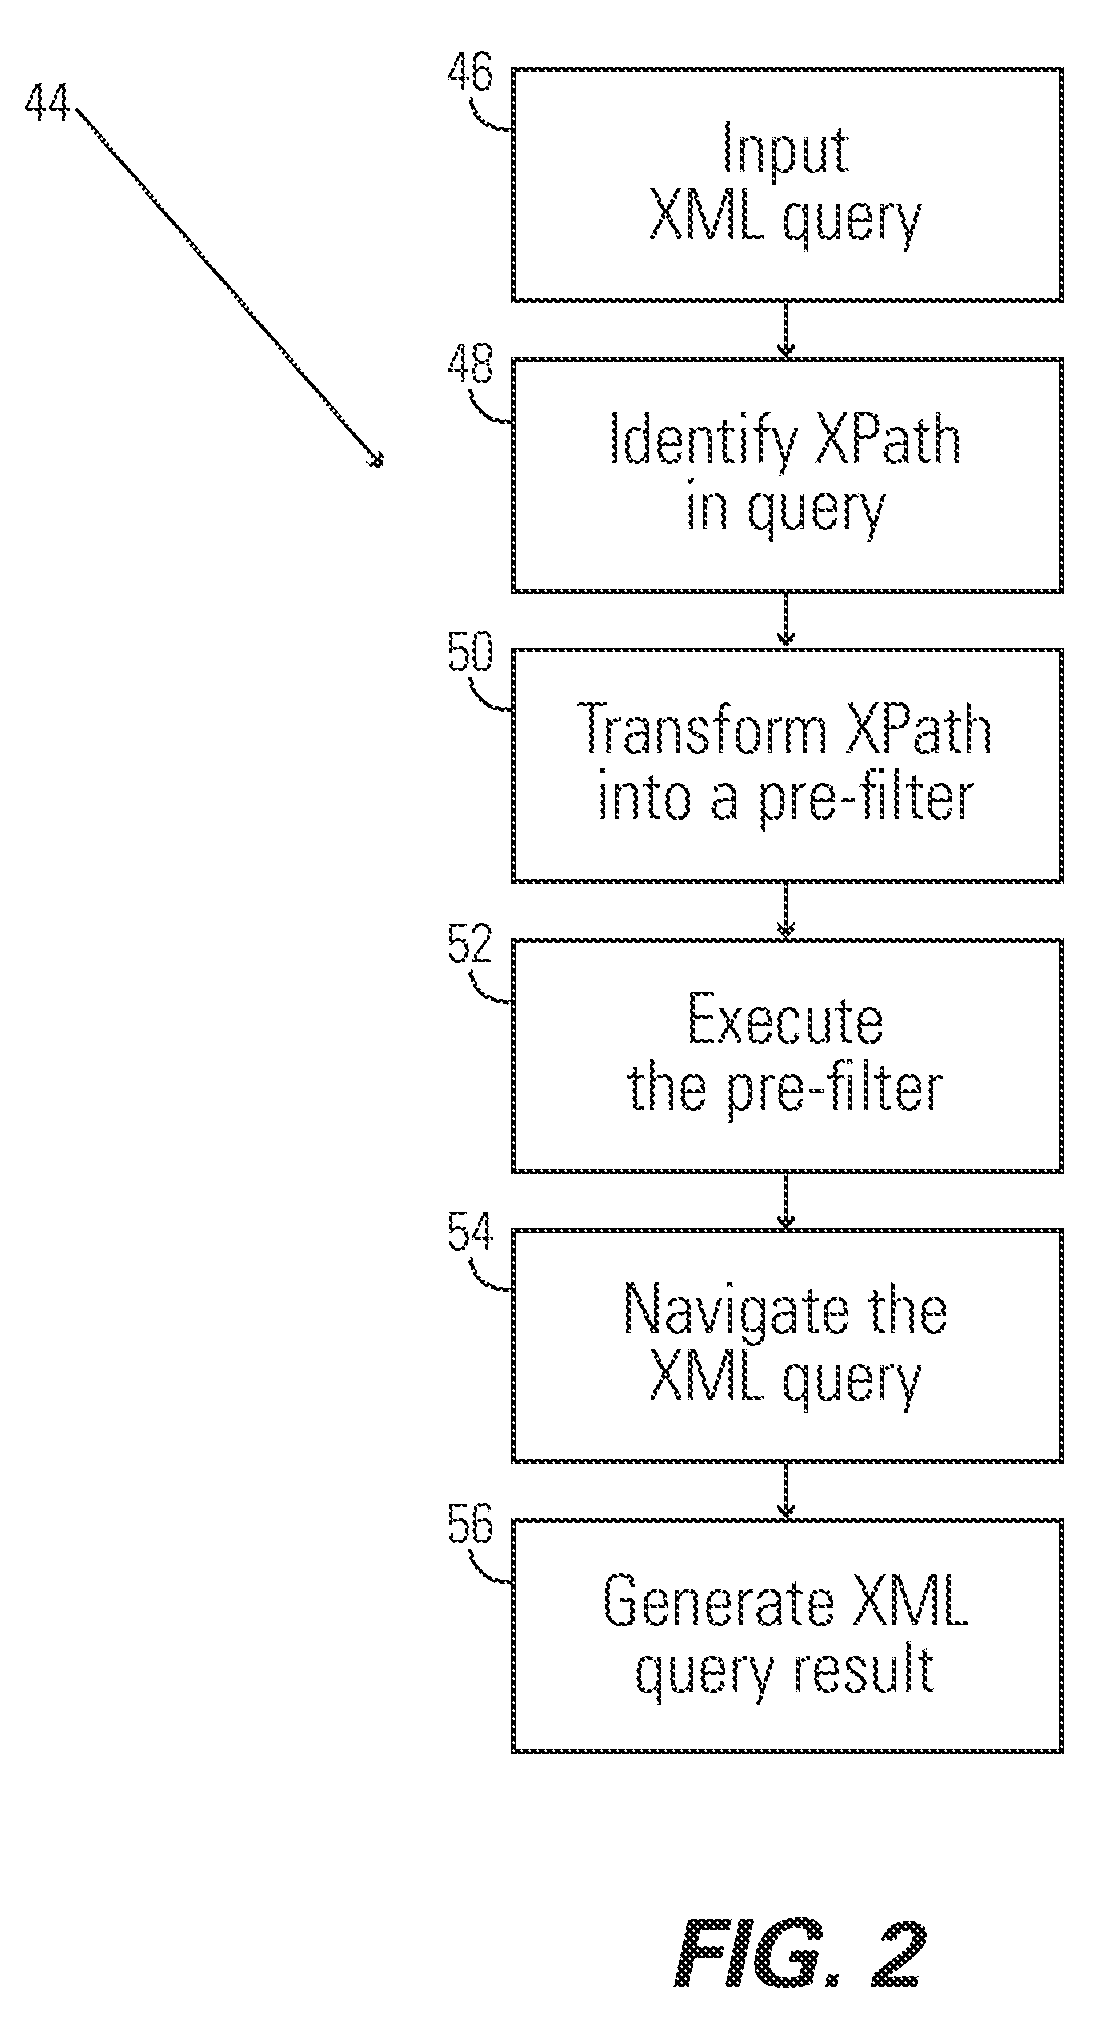 Creation of pre-filters for more efficient x-path processing